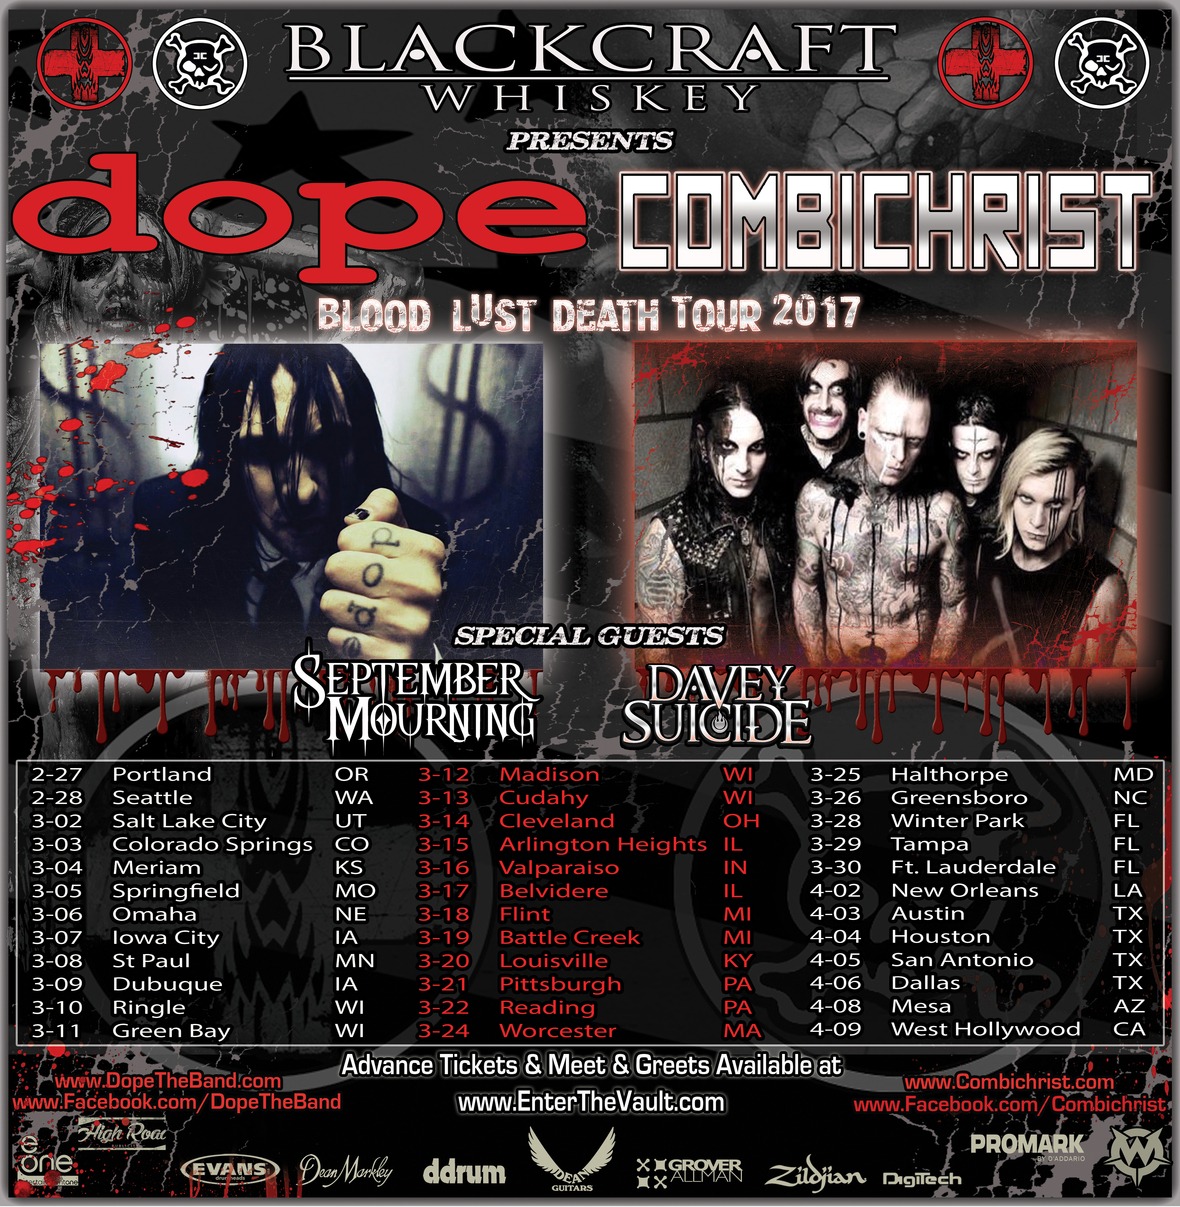 DOPE / Combichrist Announce Blood, Lust, Death 2017 Tour Sponsored by Black Craft Whiskey